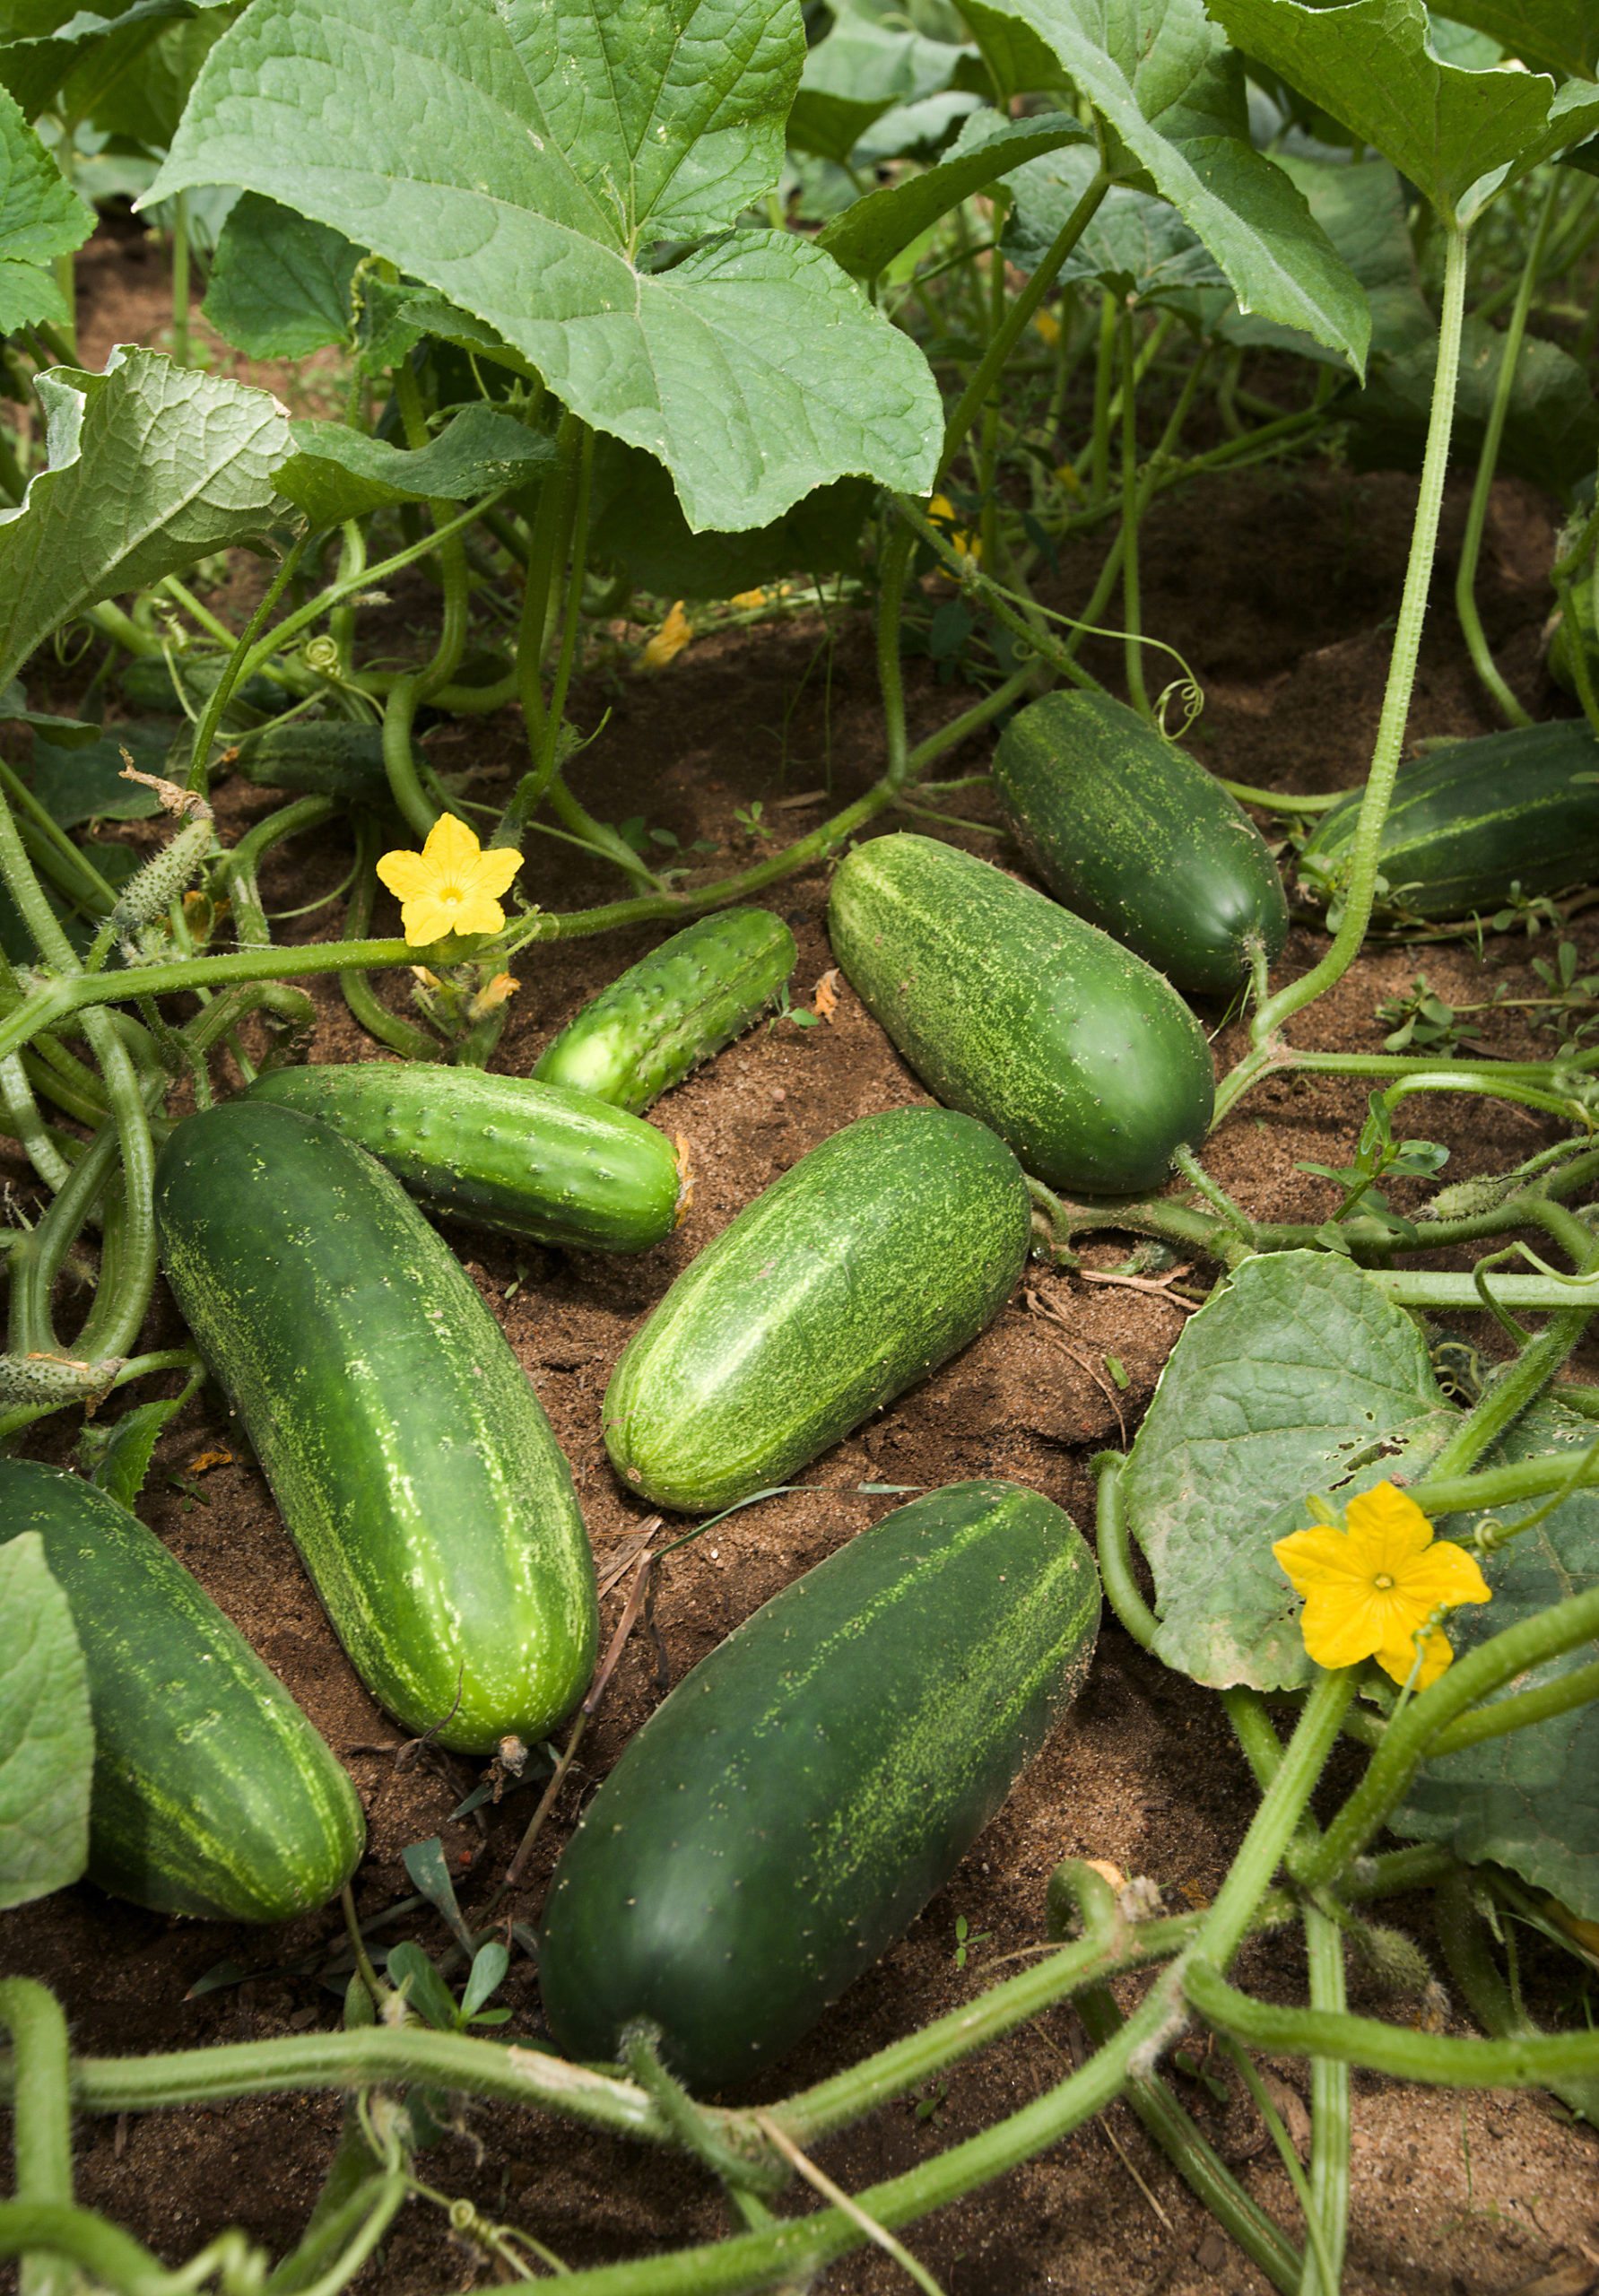 Cucumbers growing on the vine